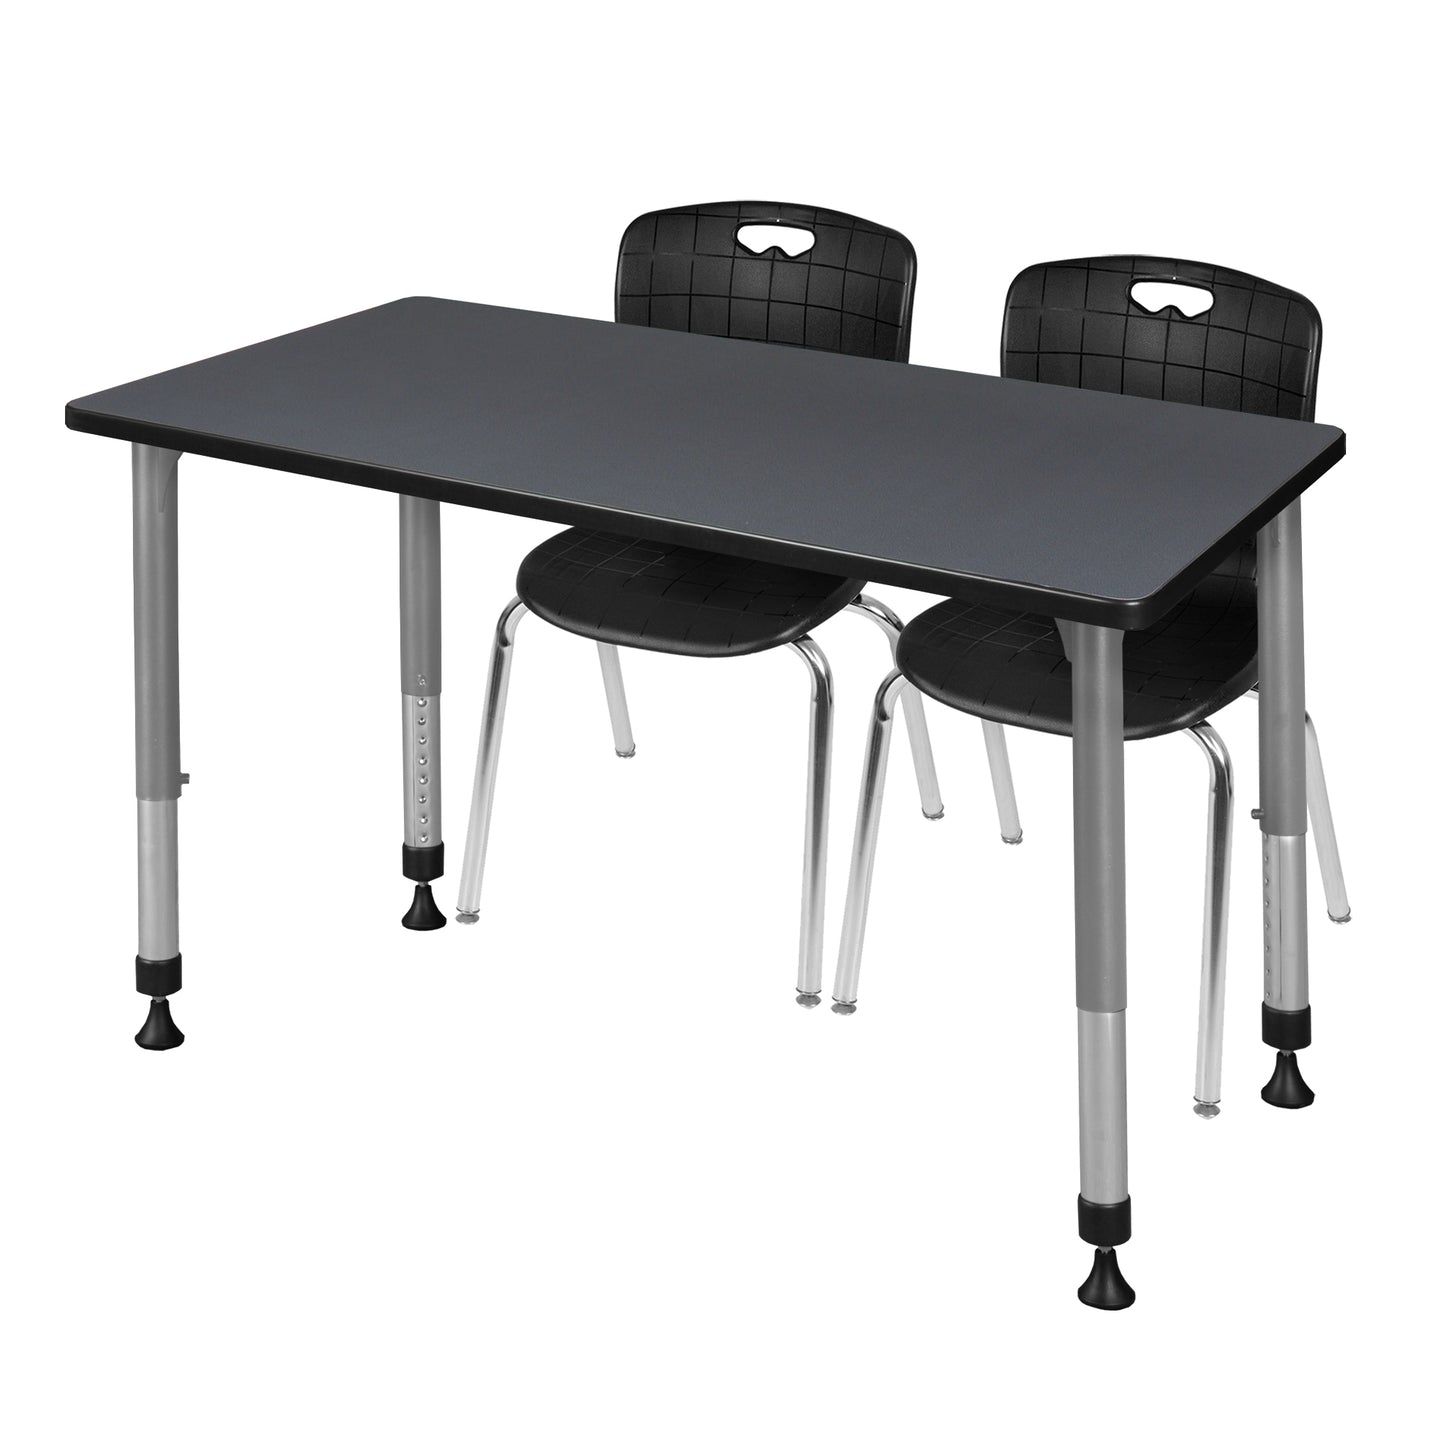 Regency Kee 48 x 24 in. Adjustable Classroom Table & 2 Andy 18 in. Stack Chairs